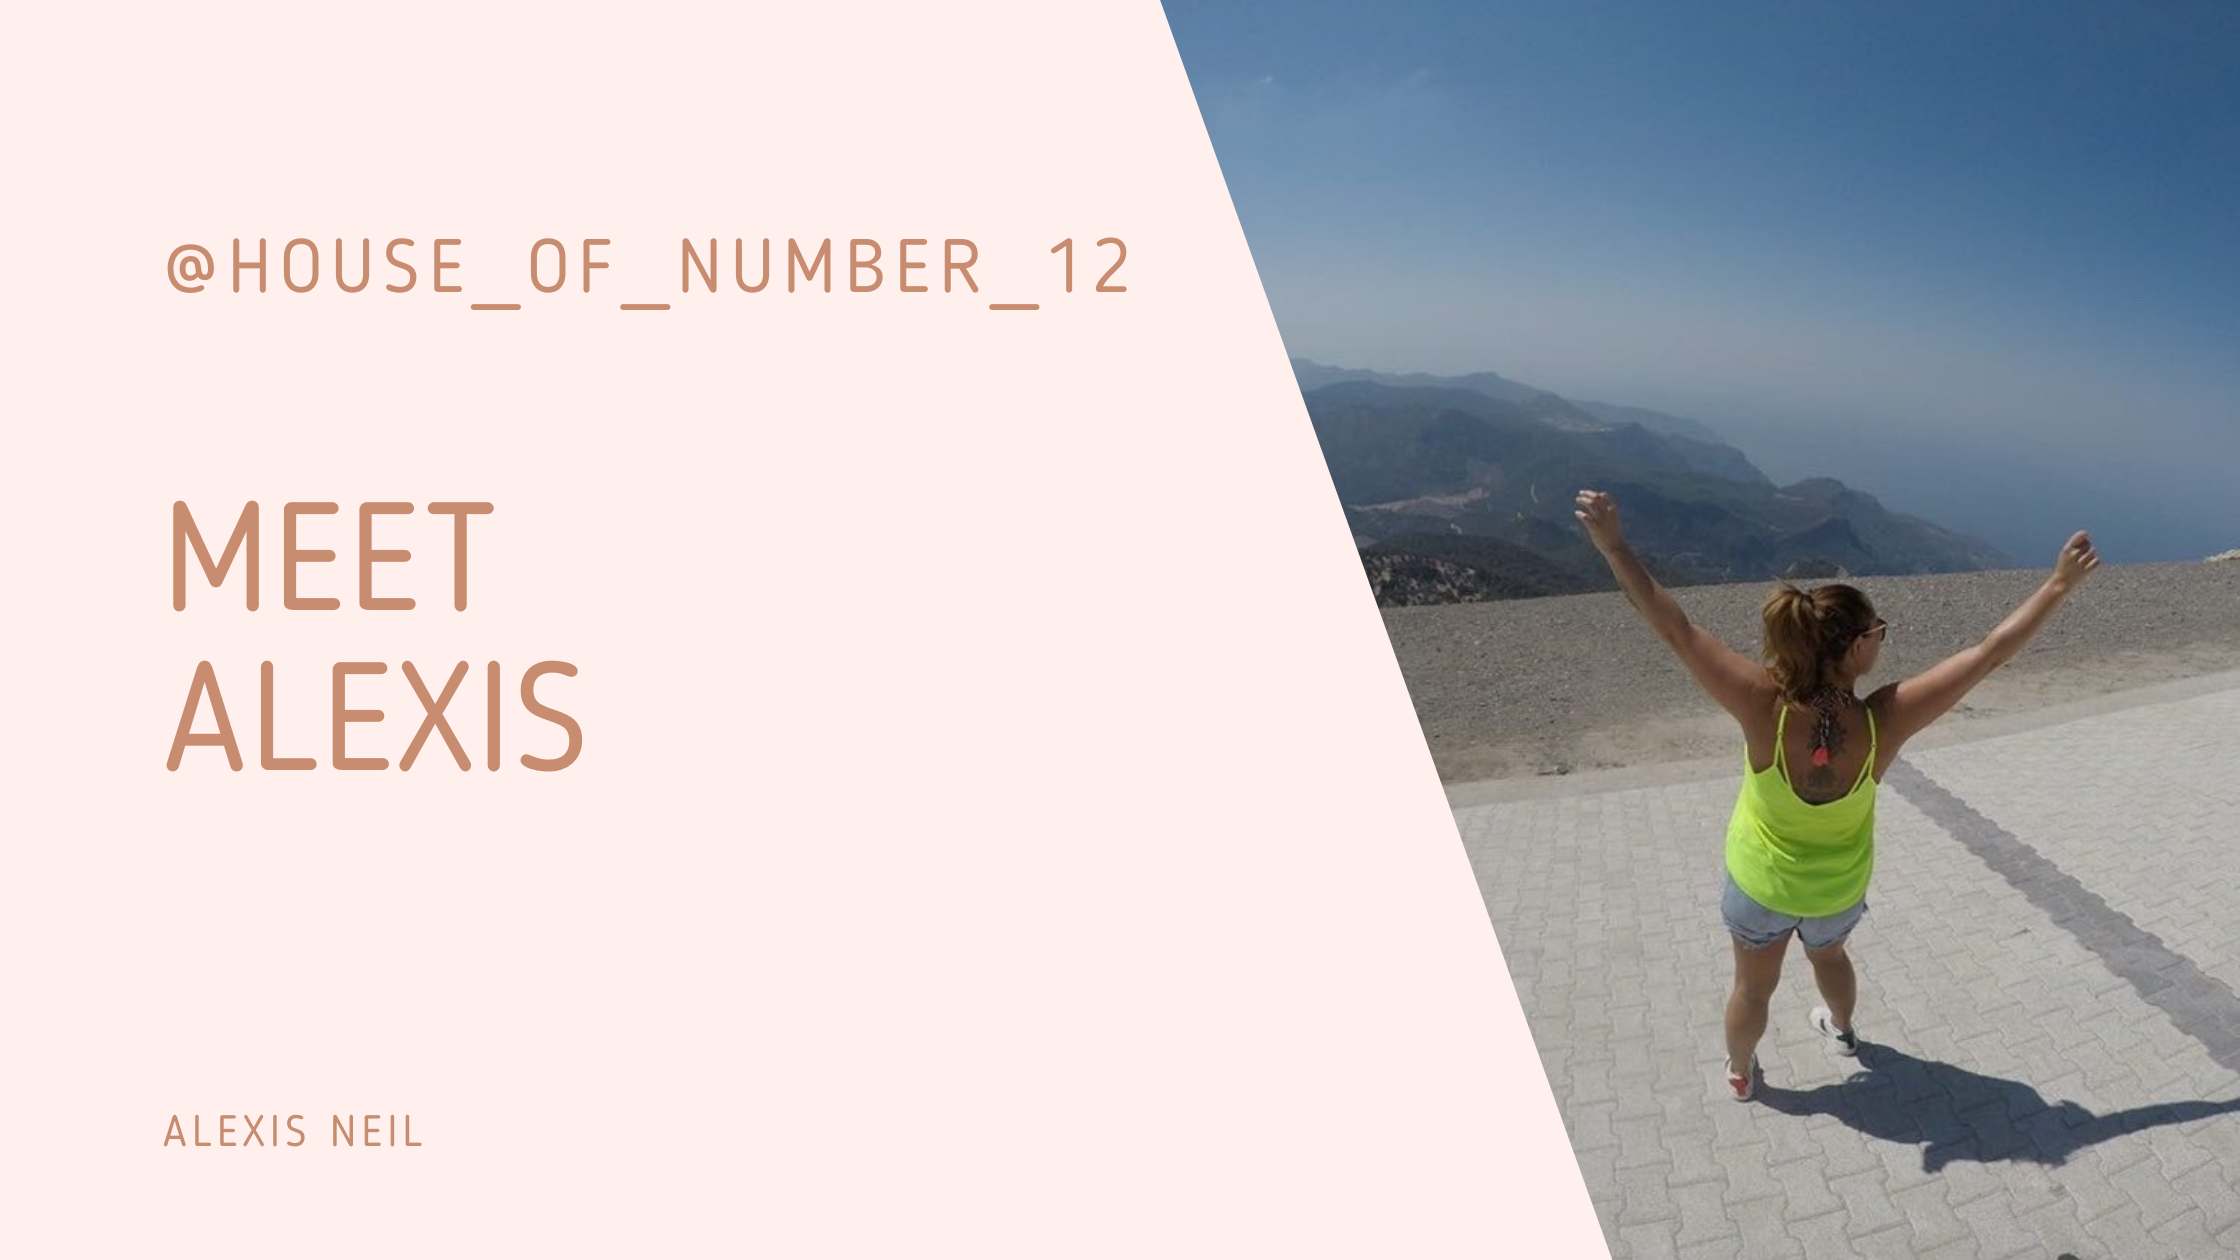 Meet Alexis - @House_of_number_12